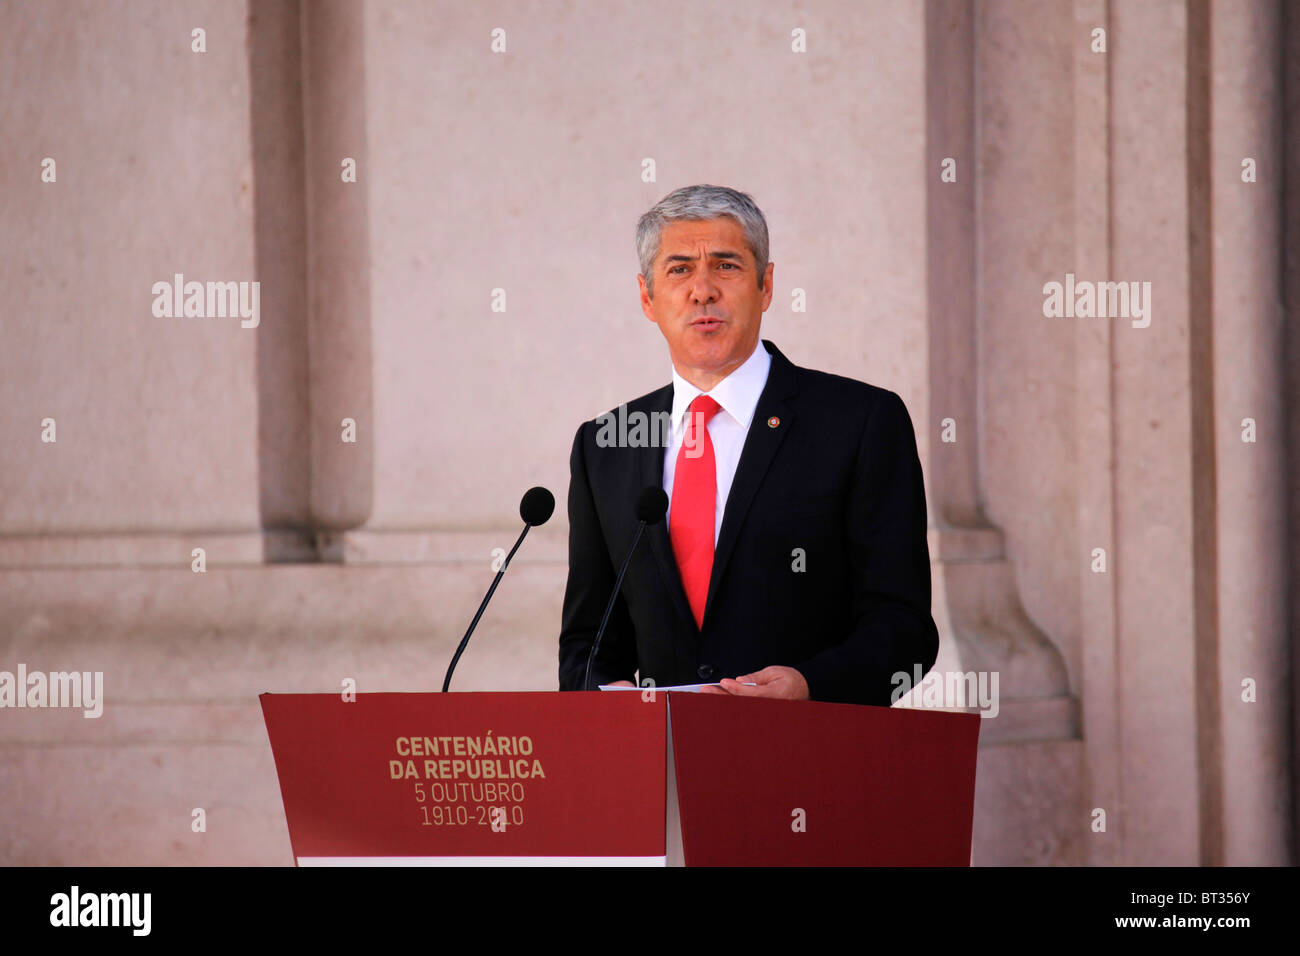 Jose Socrates, the Portuguese Prime Minister, speaks at the nation's centenary celebrations. Stock Photo